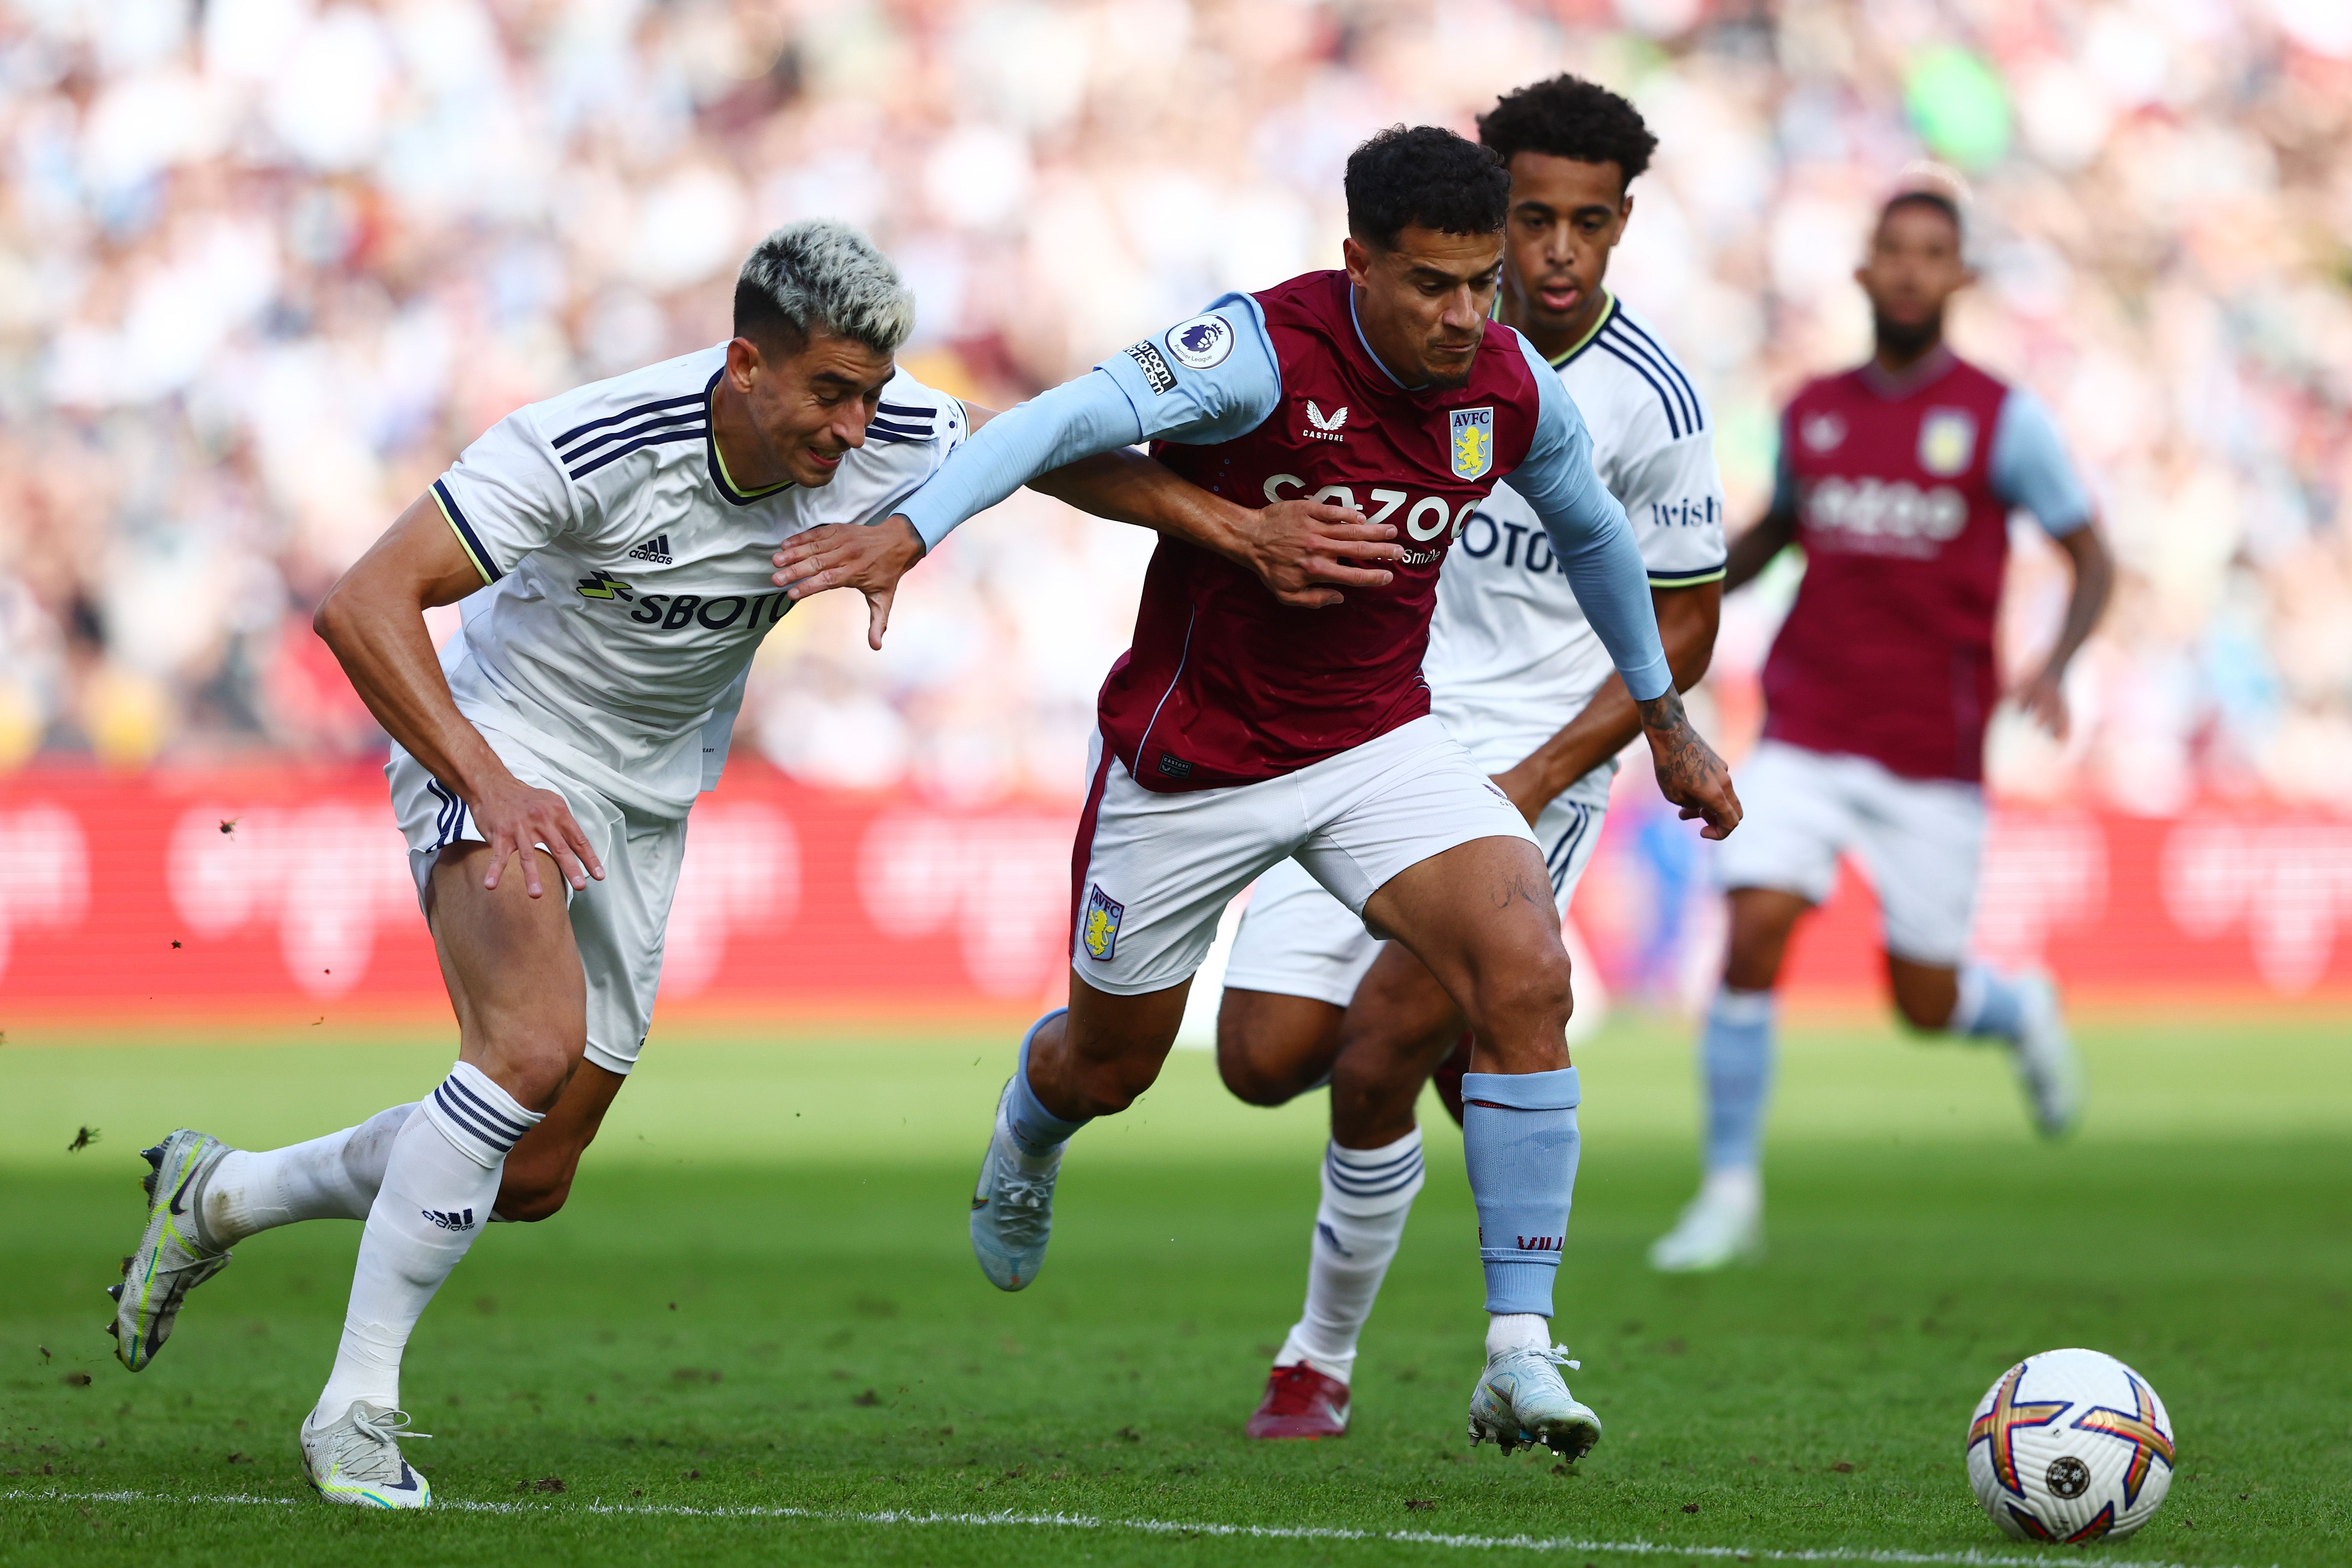 Philippe Coutinho of Aston Villa takes on the defence